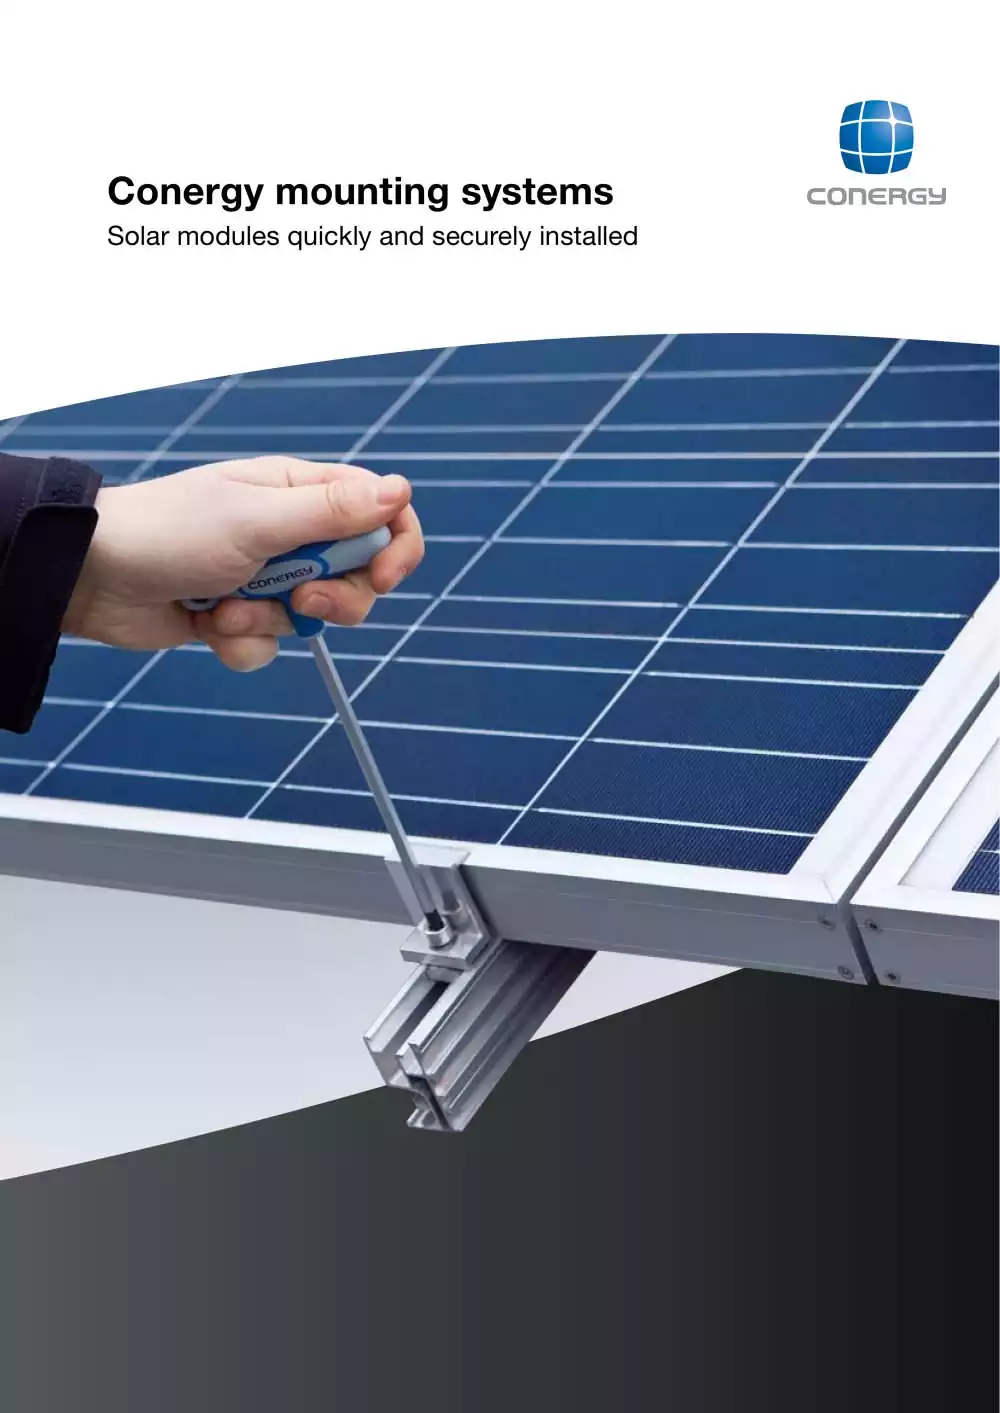 Conergy made mounting systems are now part of the full-offering of PV Products and Services